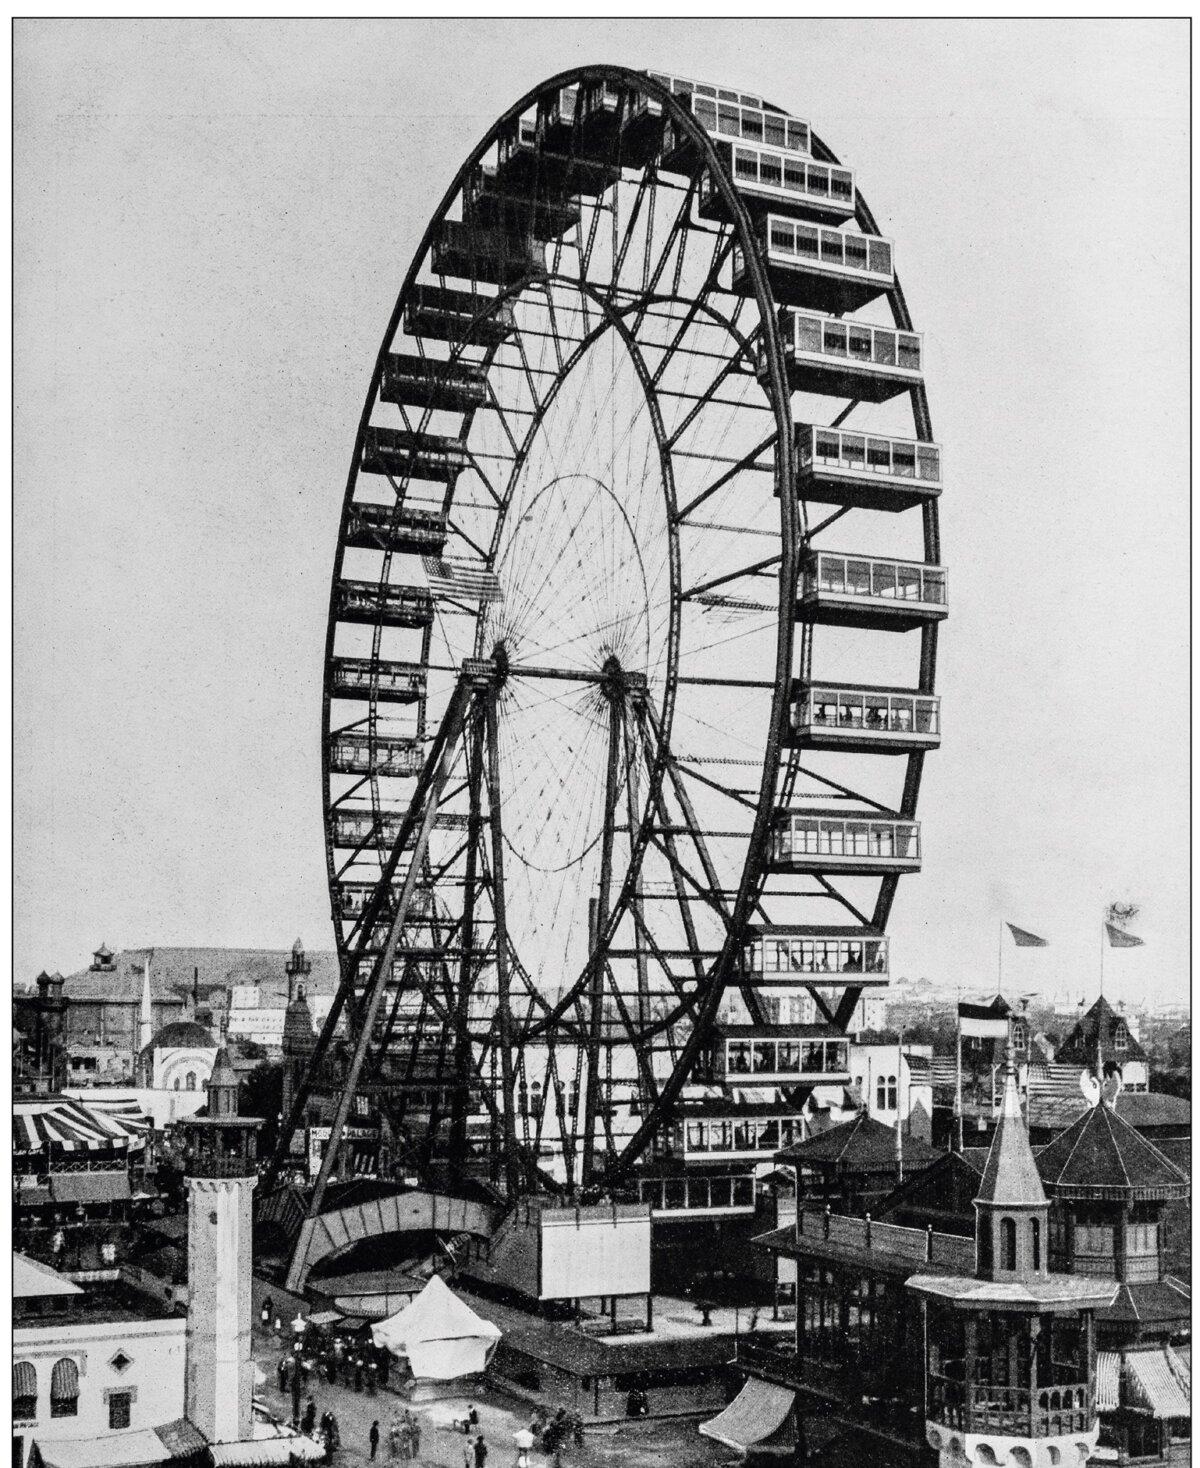 A photograph of the Ferris wheel during the 1893 World’s Columbian Exposition in Chicago. (ilbusca/Getty Images)